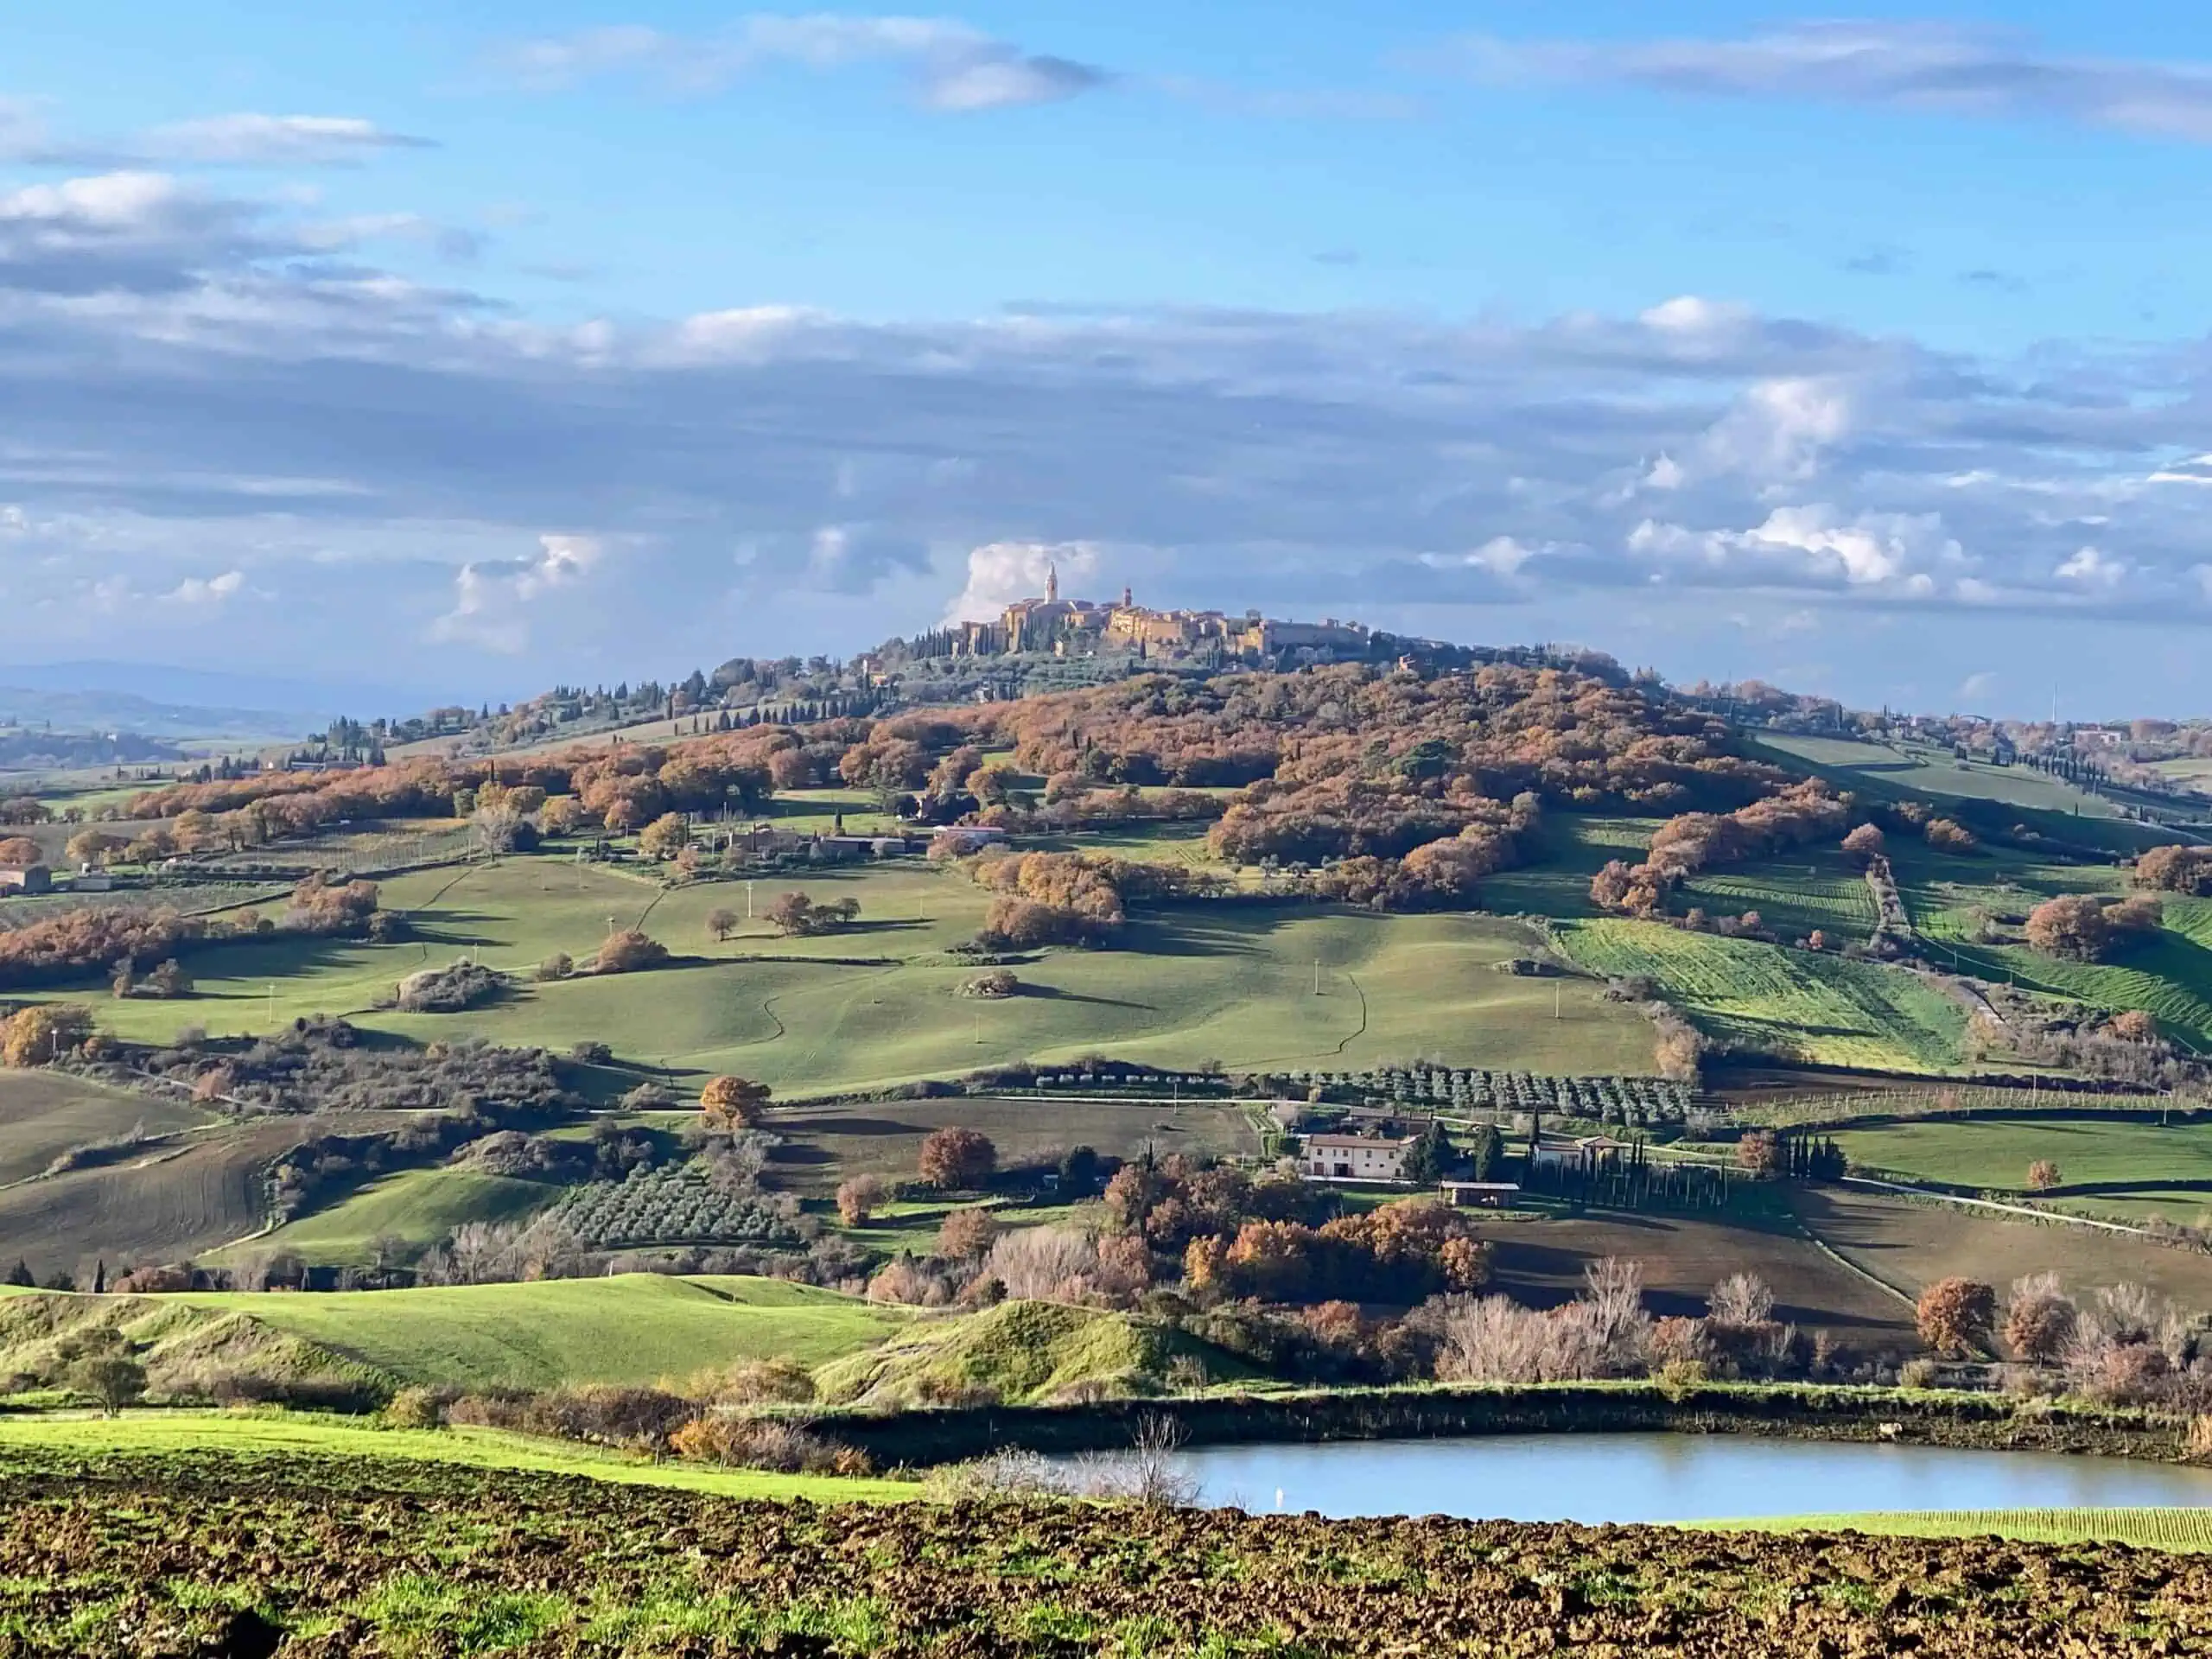 View of Pienza, Italy from a distance. You can see the small hilltop town in the distance. It's surrounded by woods and green rolling hills. Small pond in the foreground.